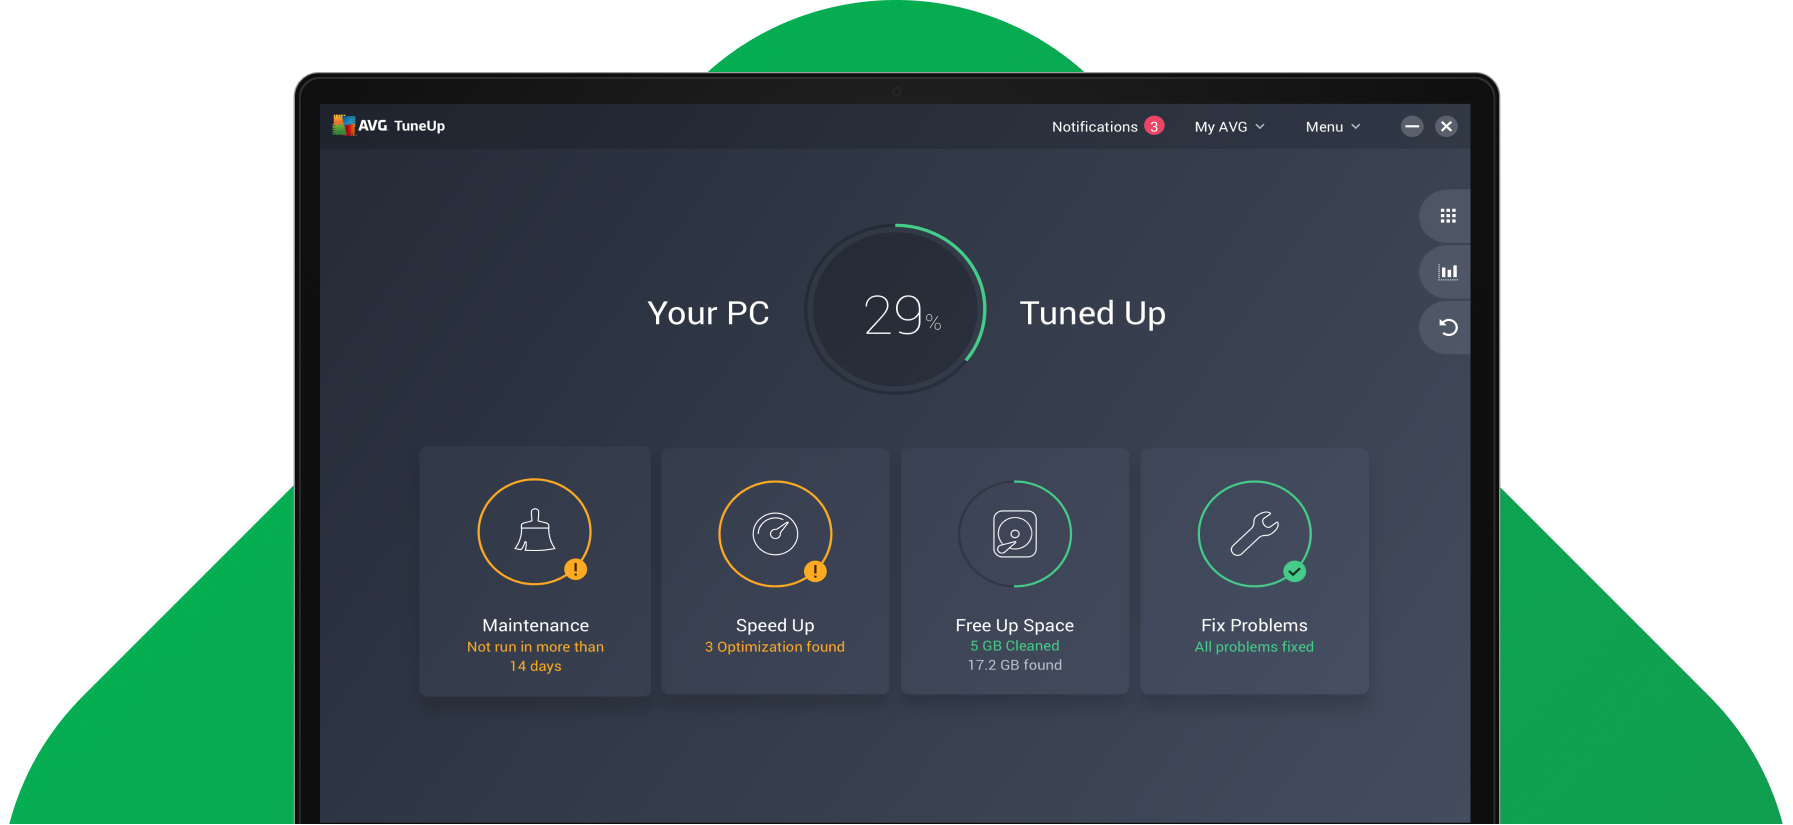 Download avg free dts audio control panel download windows 10